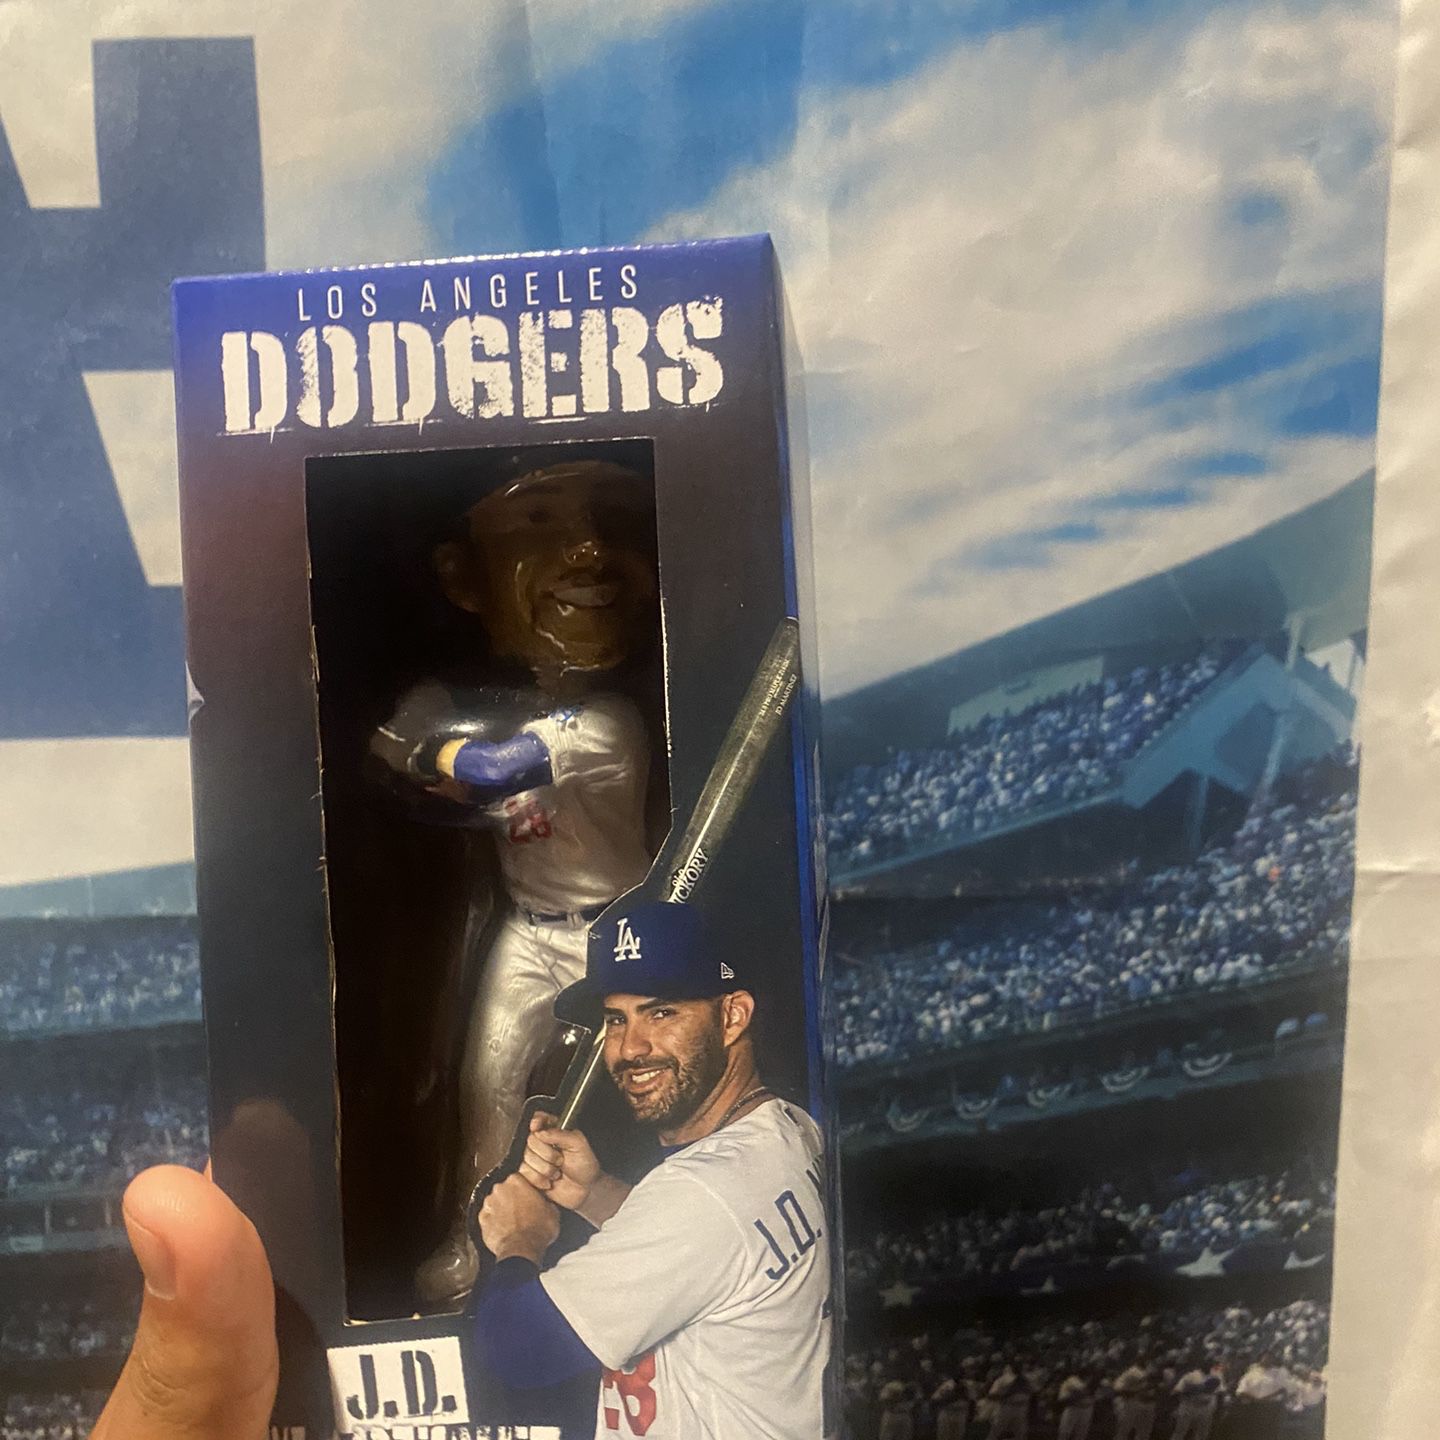 JD Martinez promotional bobblehead - collectibles - by owner